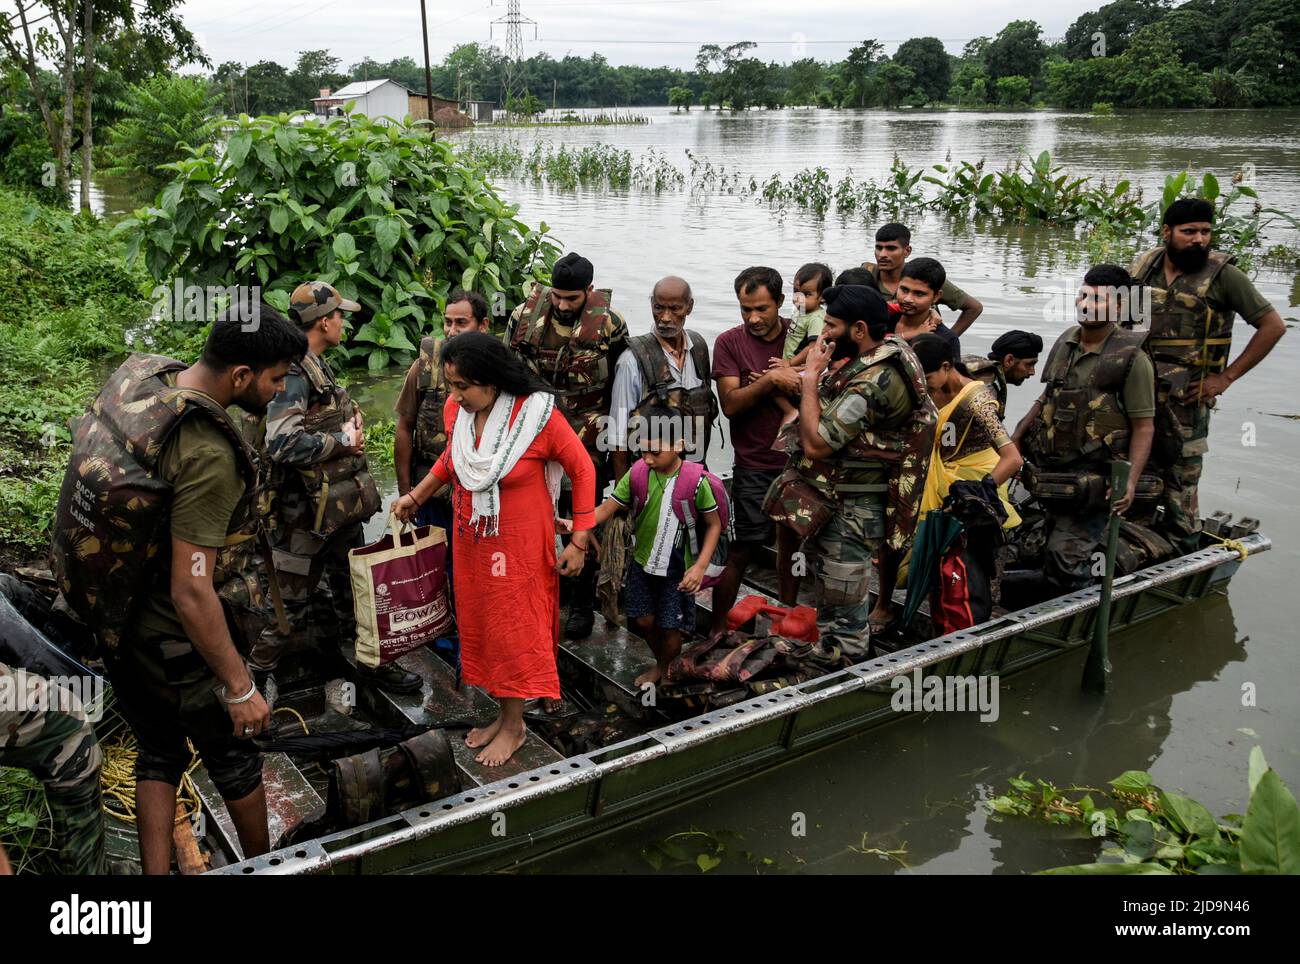 Punjab Regiment personnel rescue flood affected residents, at a village on June 17, 2022 in Barpeta, India. Assam flood situation deteriorates due to heavy rain, over a million people affected. Stock Photo